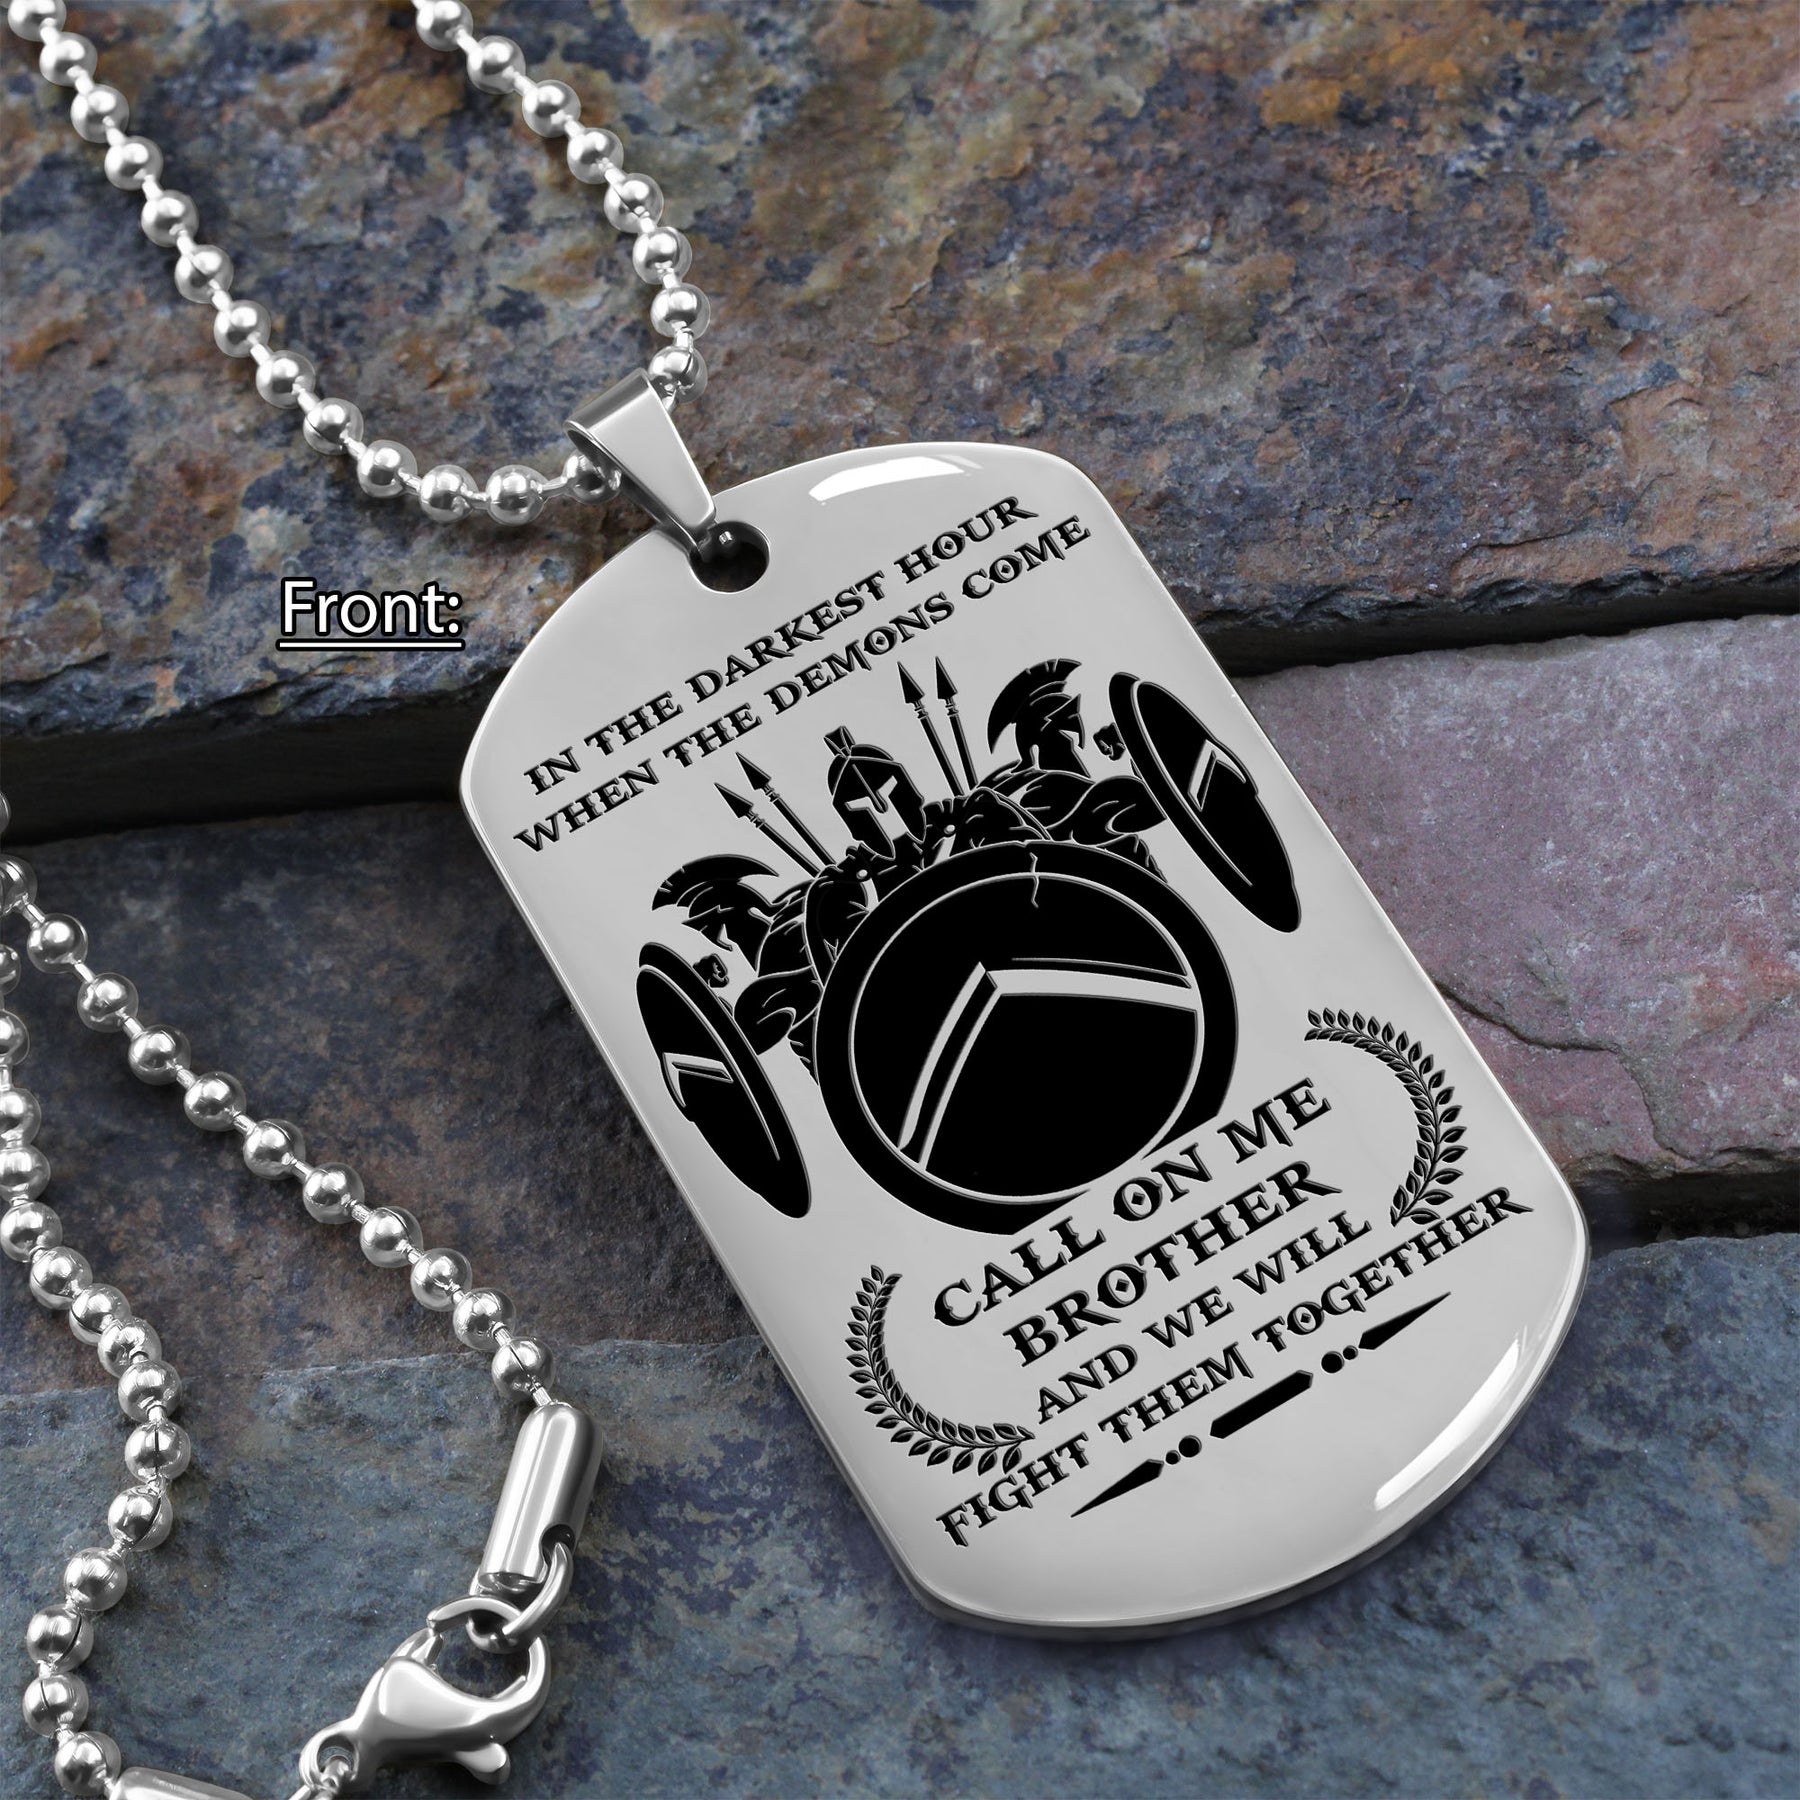 WAD049 - Call On Me Brother - Quitting Is Not - Warrior Dog Tag - Engrave Double Sliver Dog Tag